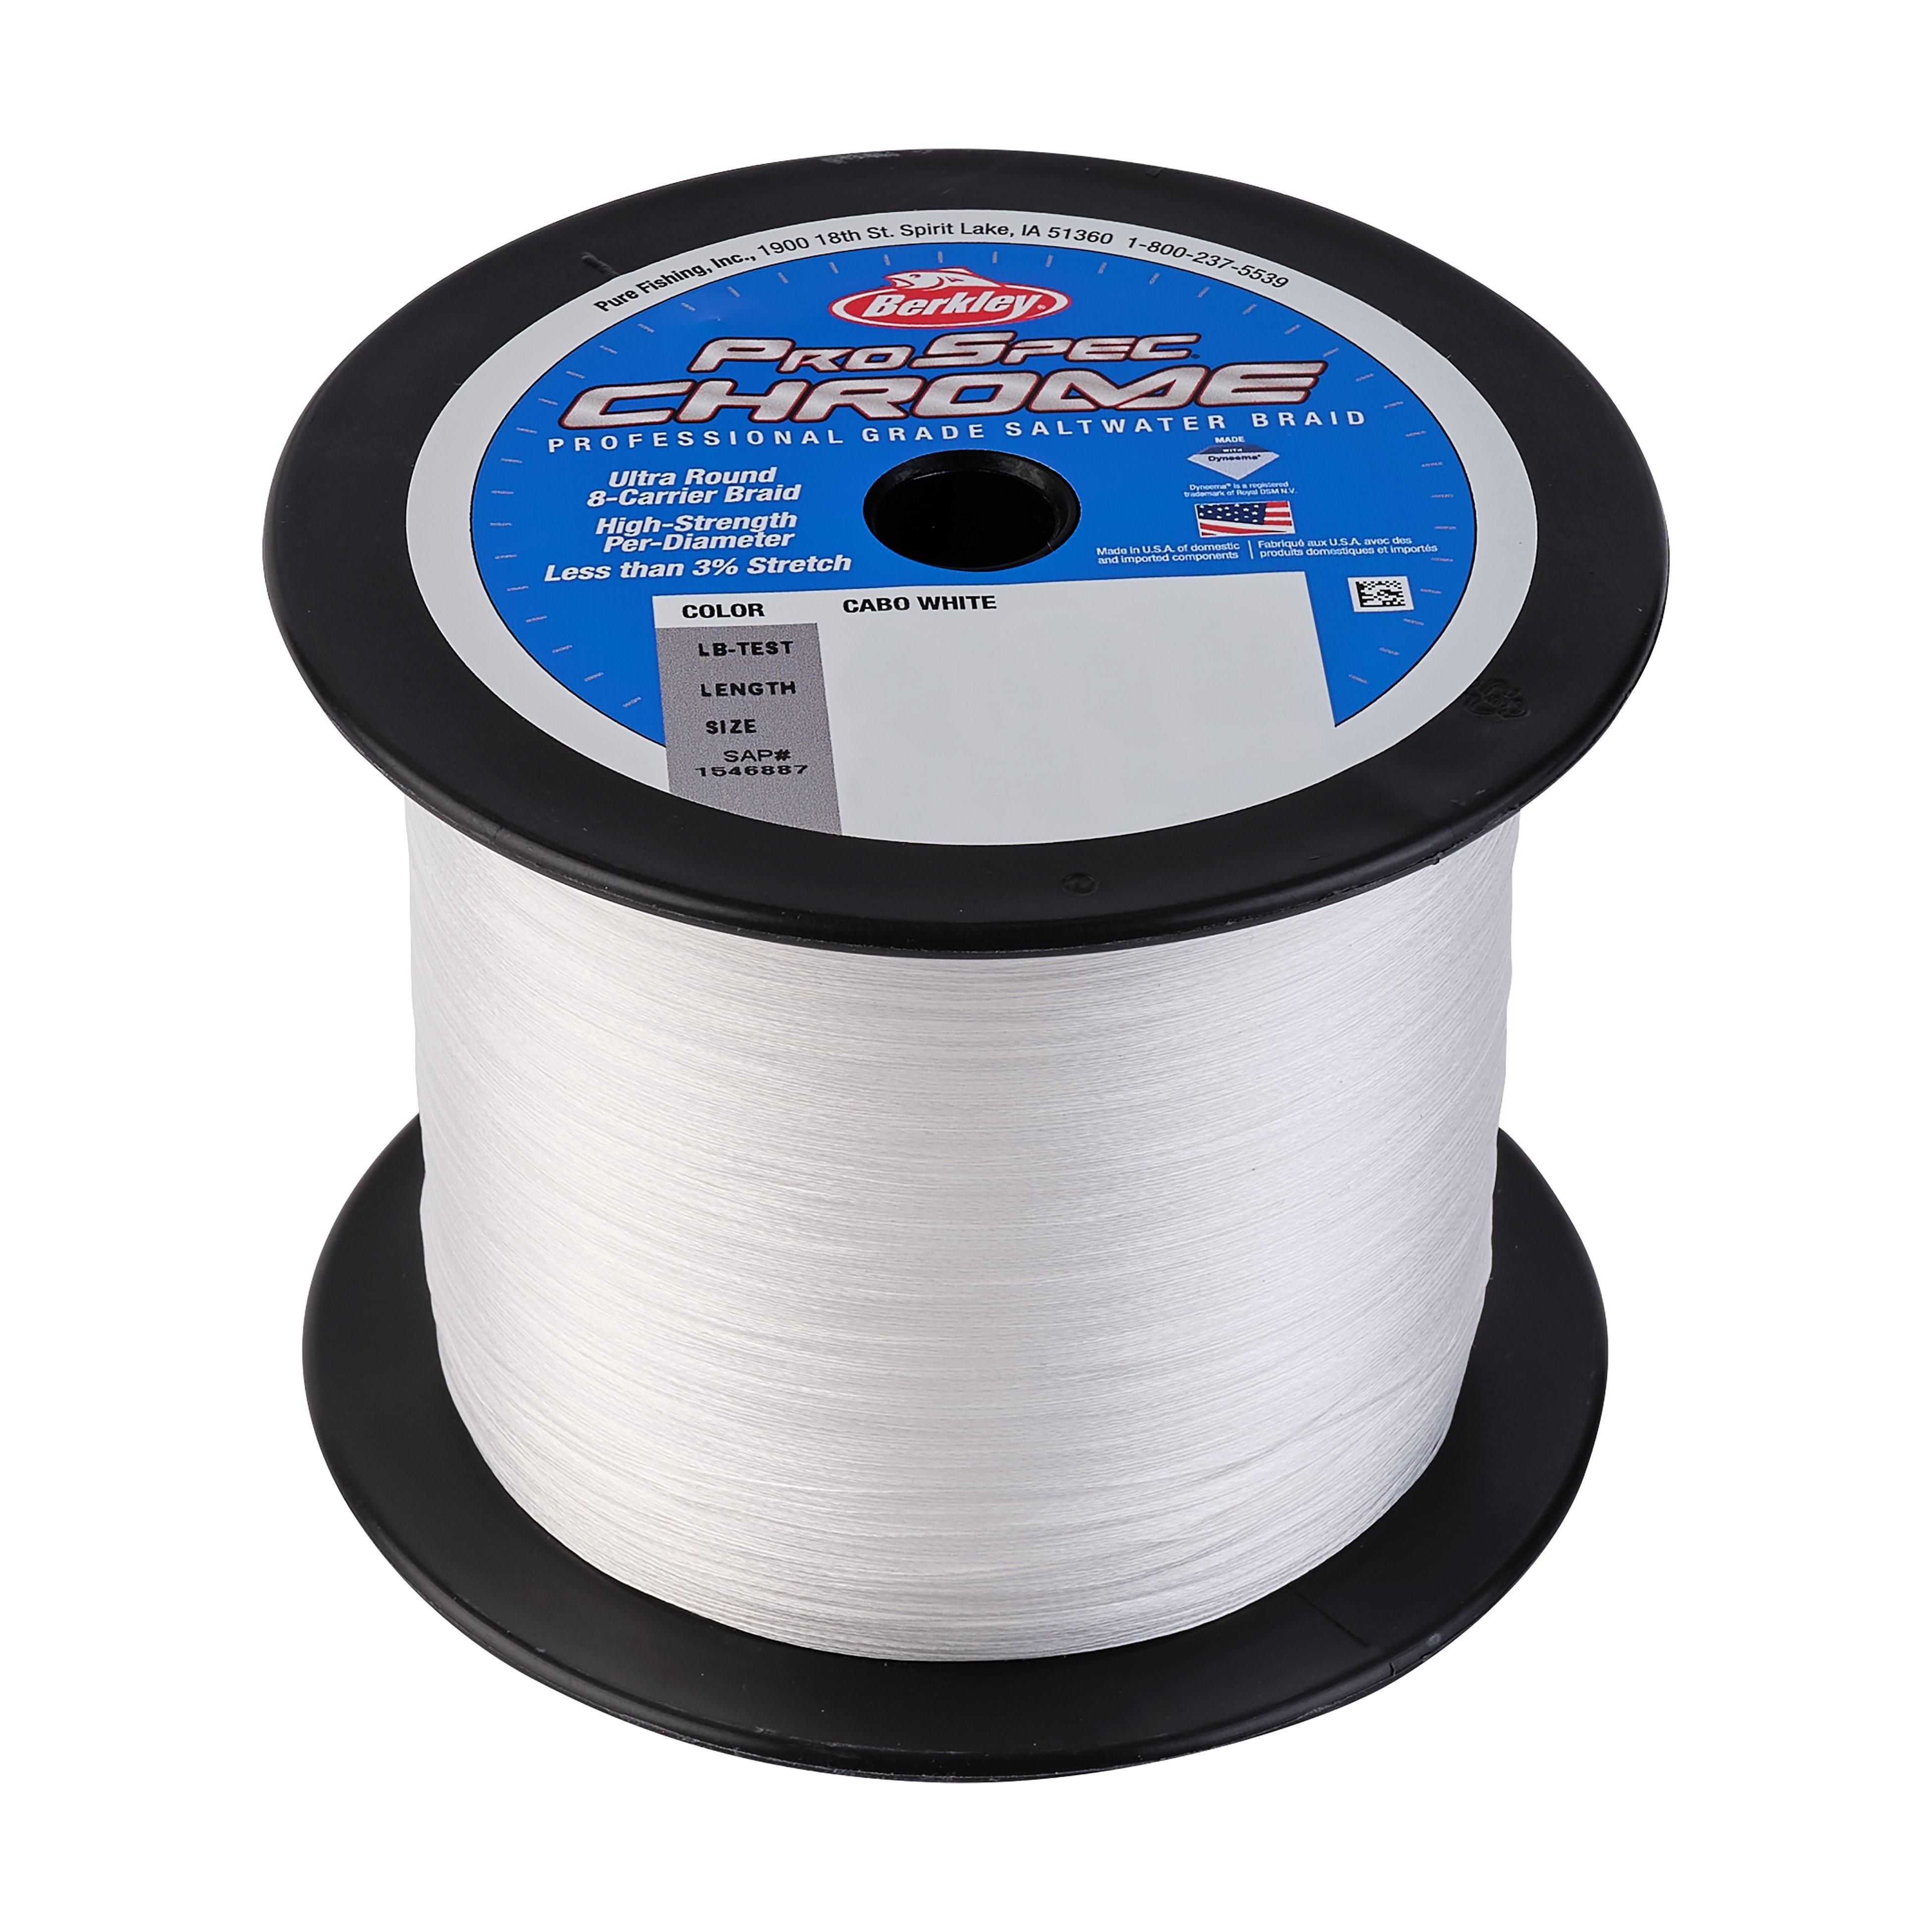 Details about   110yds 100m RED SUPERLINE BRAID 90lb test Braided Fishing Line Big Game Fish 